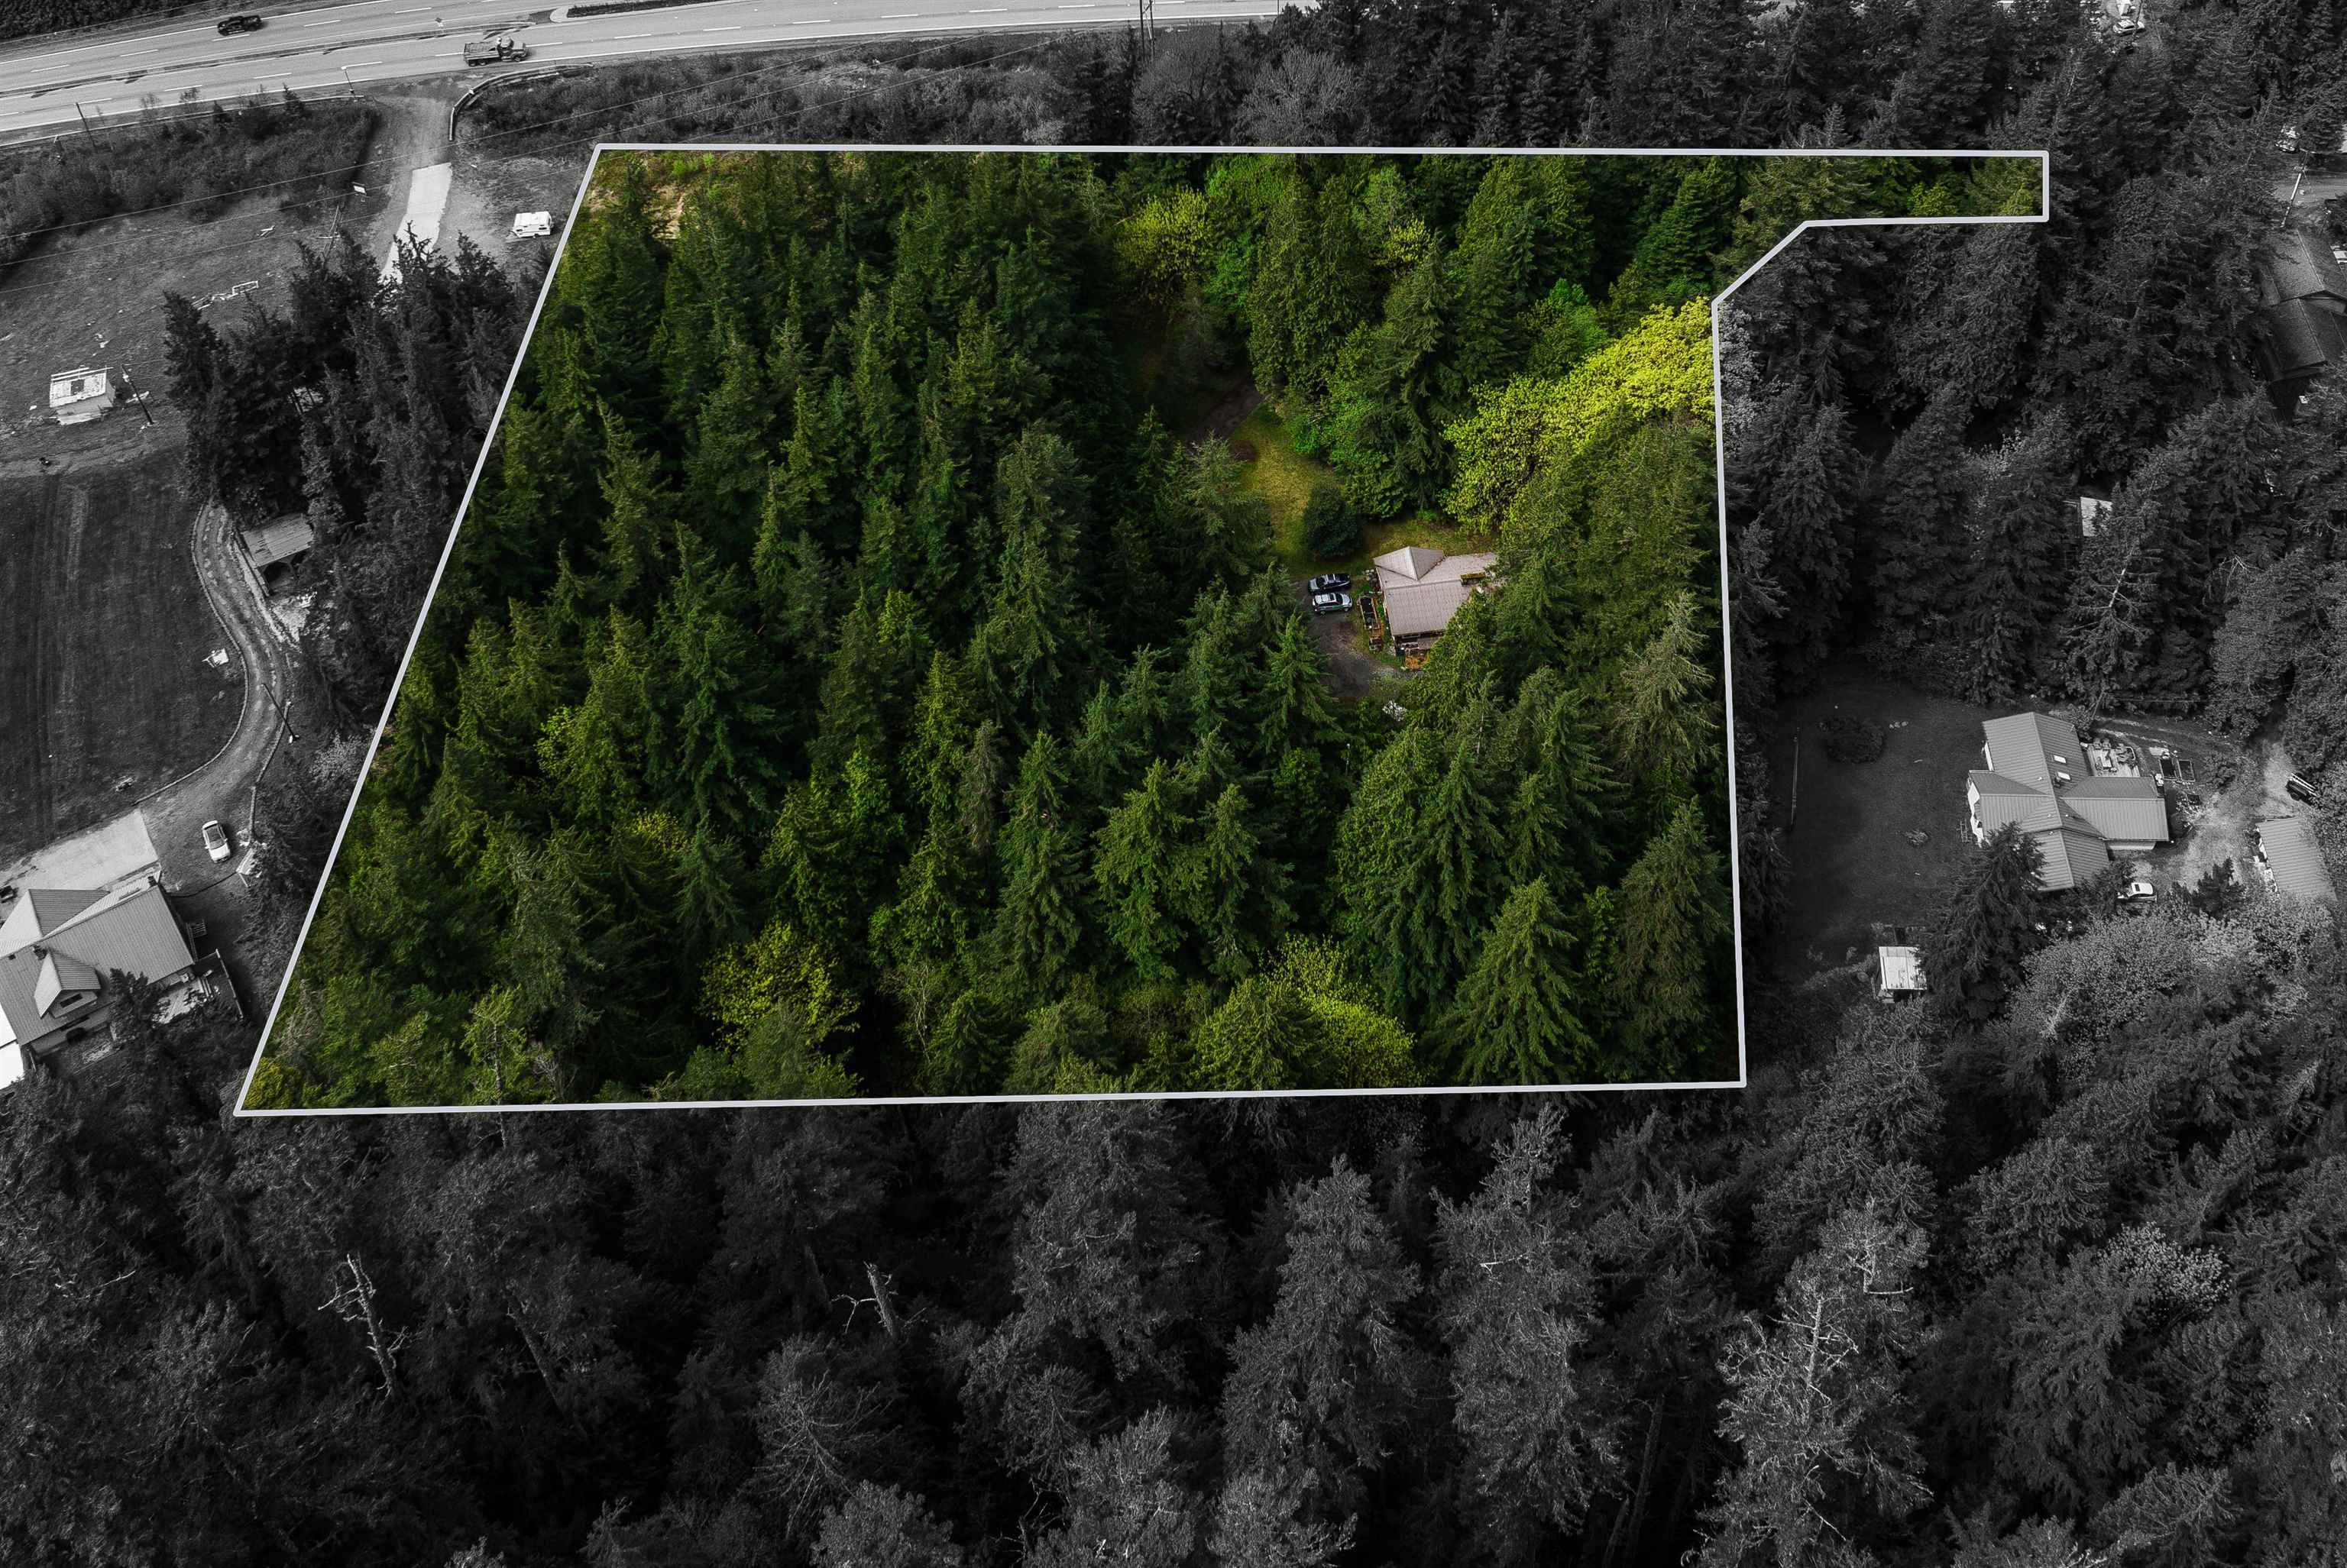 Main Photo: 1774 DEPOT Road in Squamish: Tantalus Land Commercial for sale : MLS®# C8046211